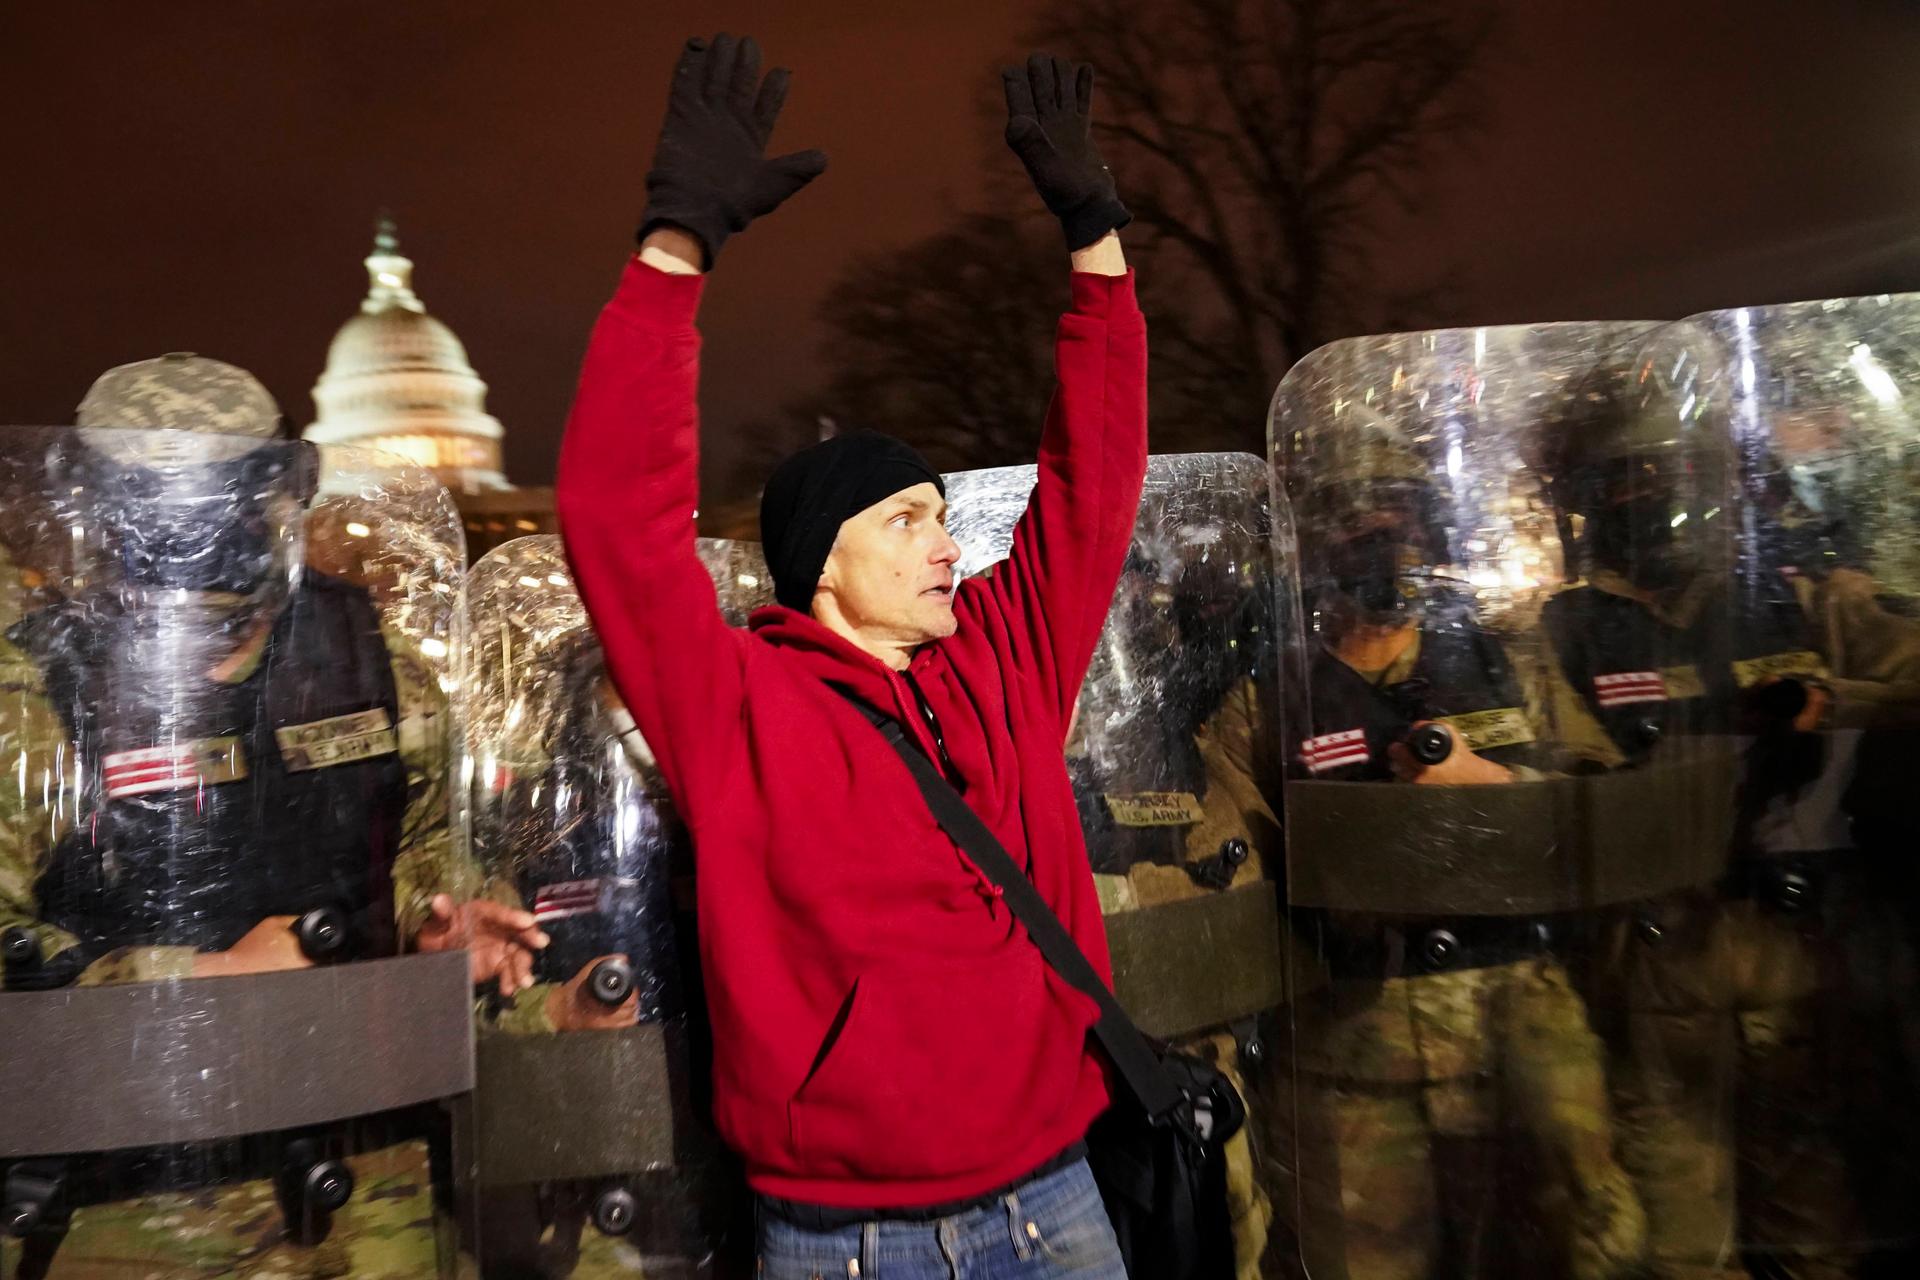 National guard appear behind a man wearing a red sweater, who has his hands up.